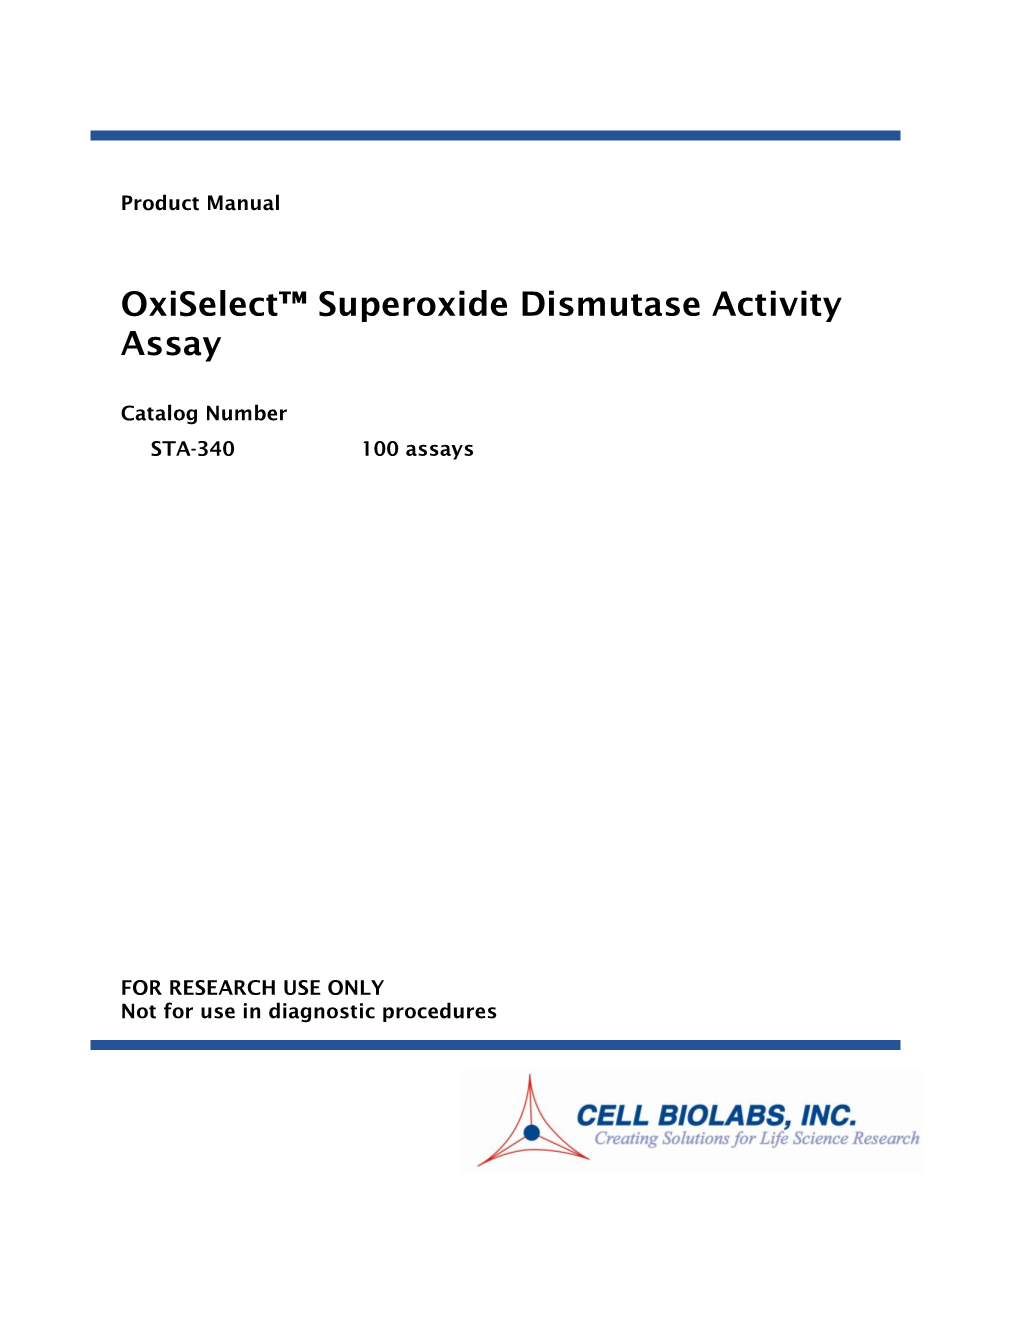 Oxiselect™ Superoxide Dismutase Activity Assay Uses a Xanthine/Xanthine Oxidase (XOD) System to Generate Superoxide Anions